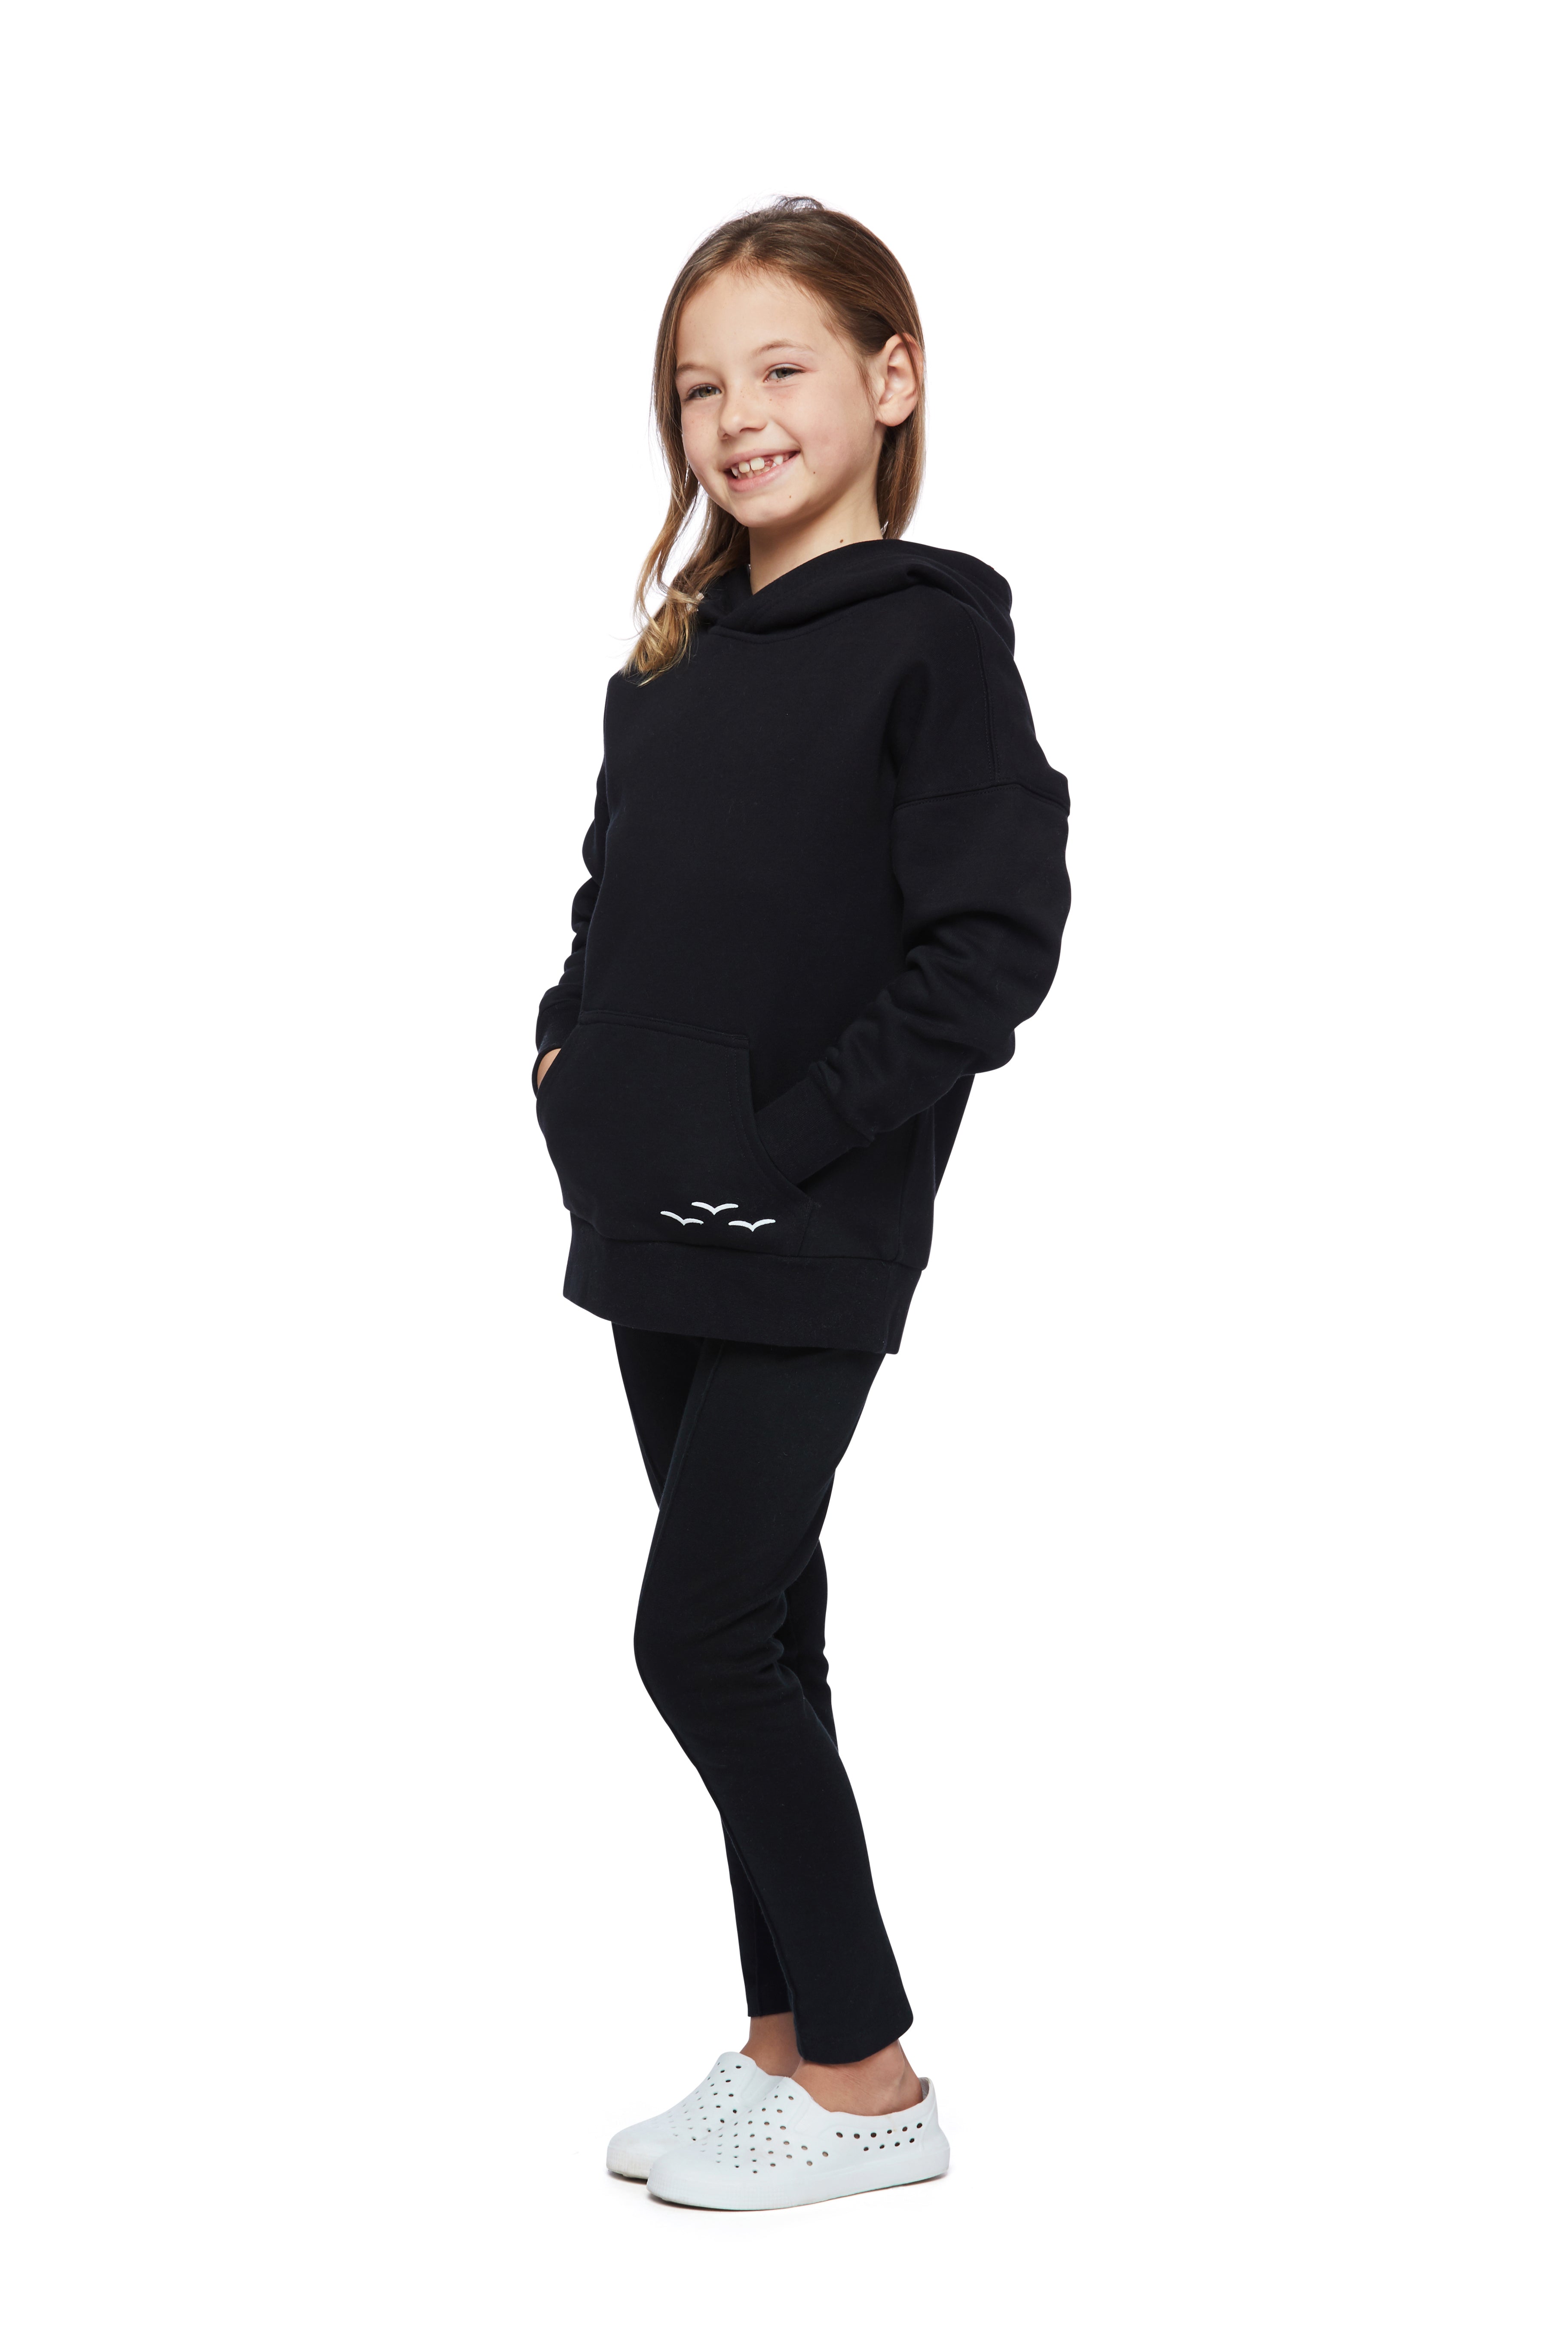 Kids Cooper hoodie in black from Lazypants - always a great buy at a reasonable price.